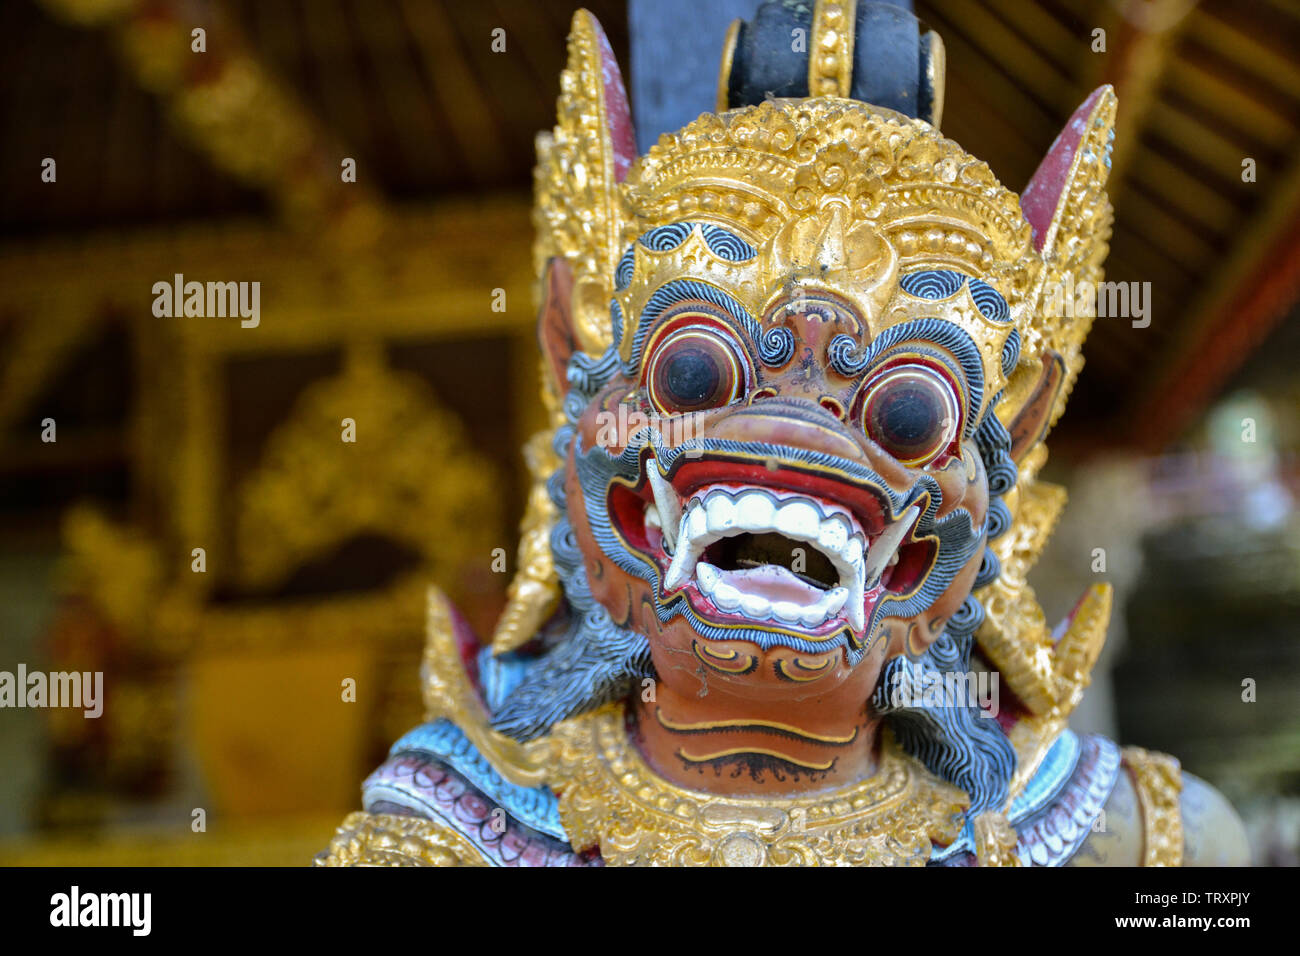 Balinese culture Stock Photo